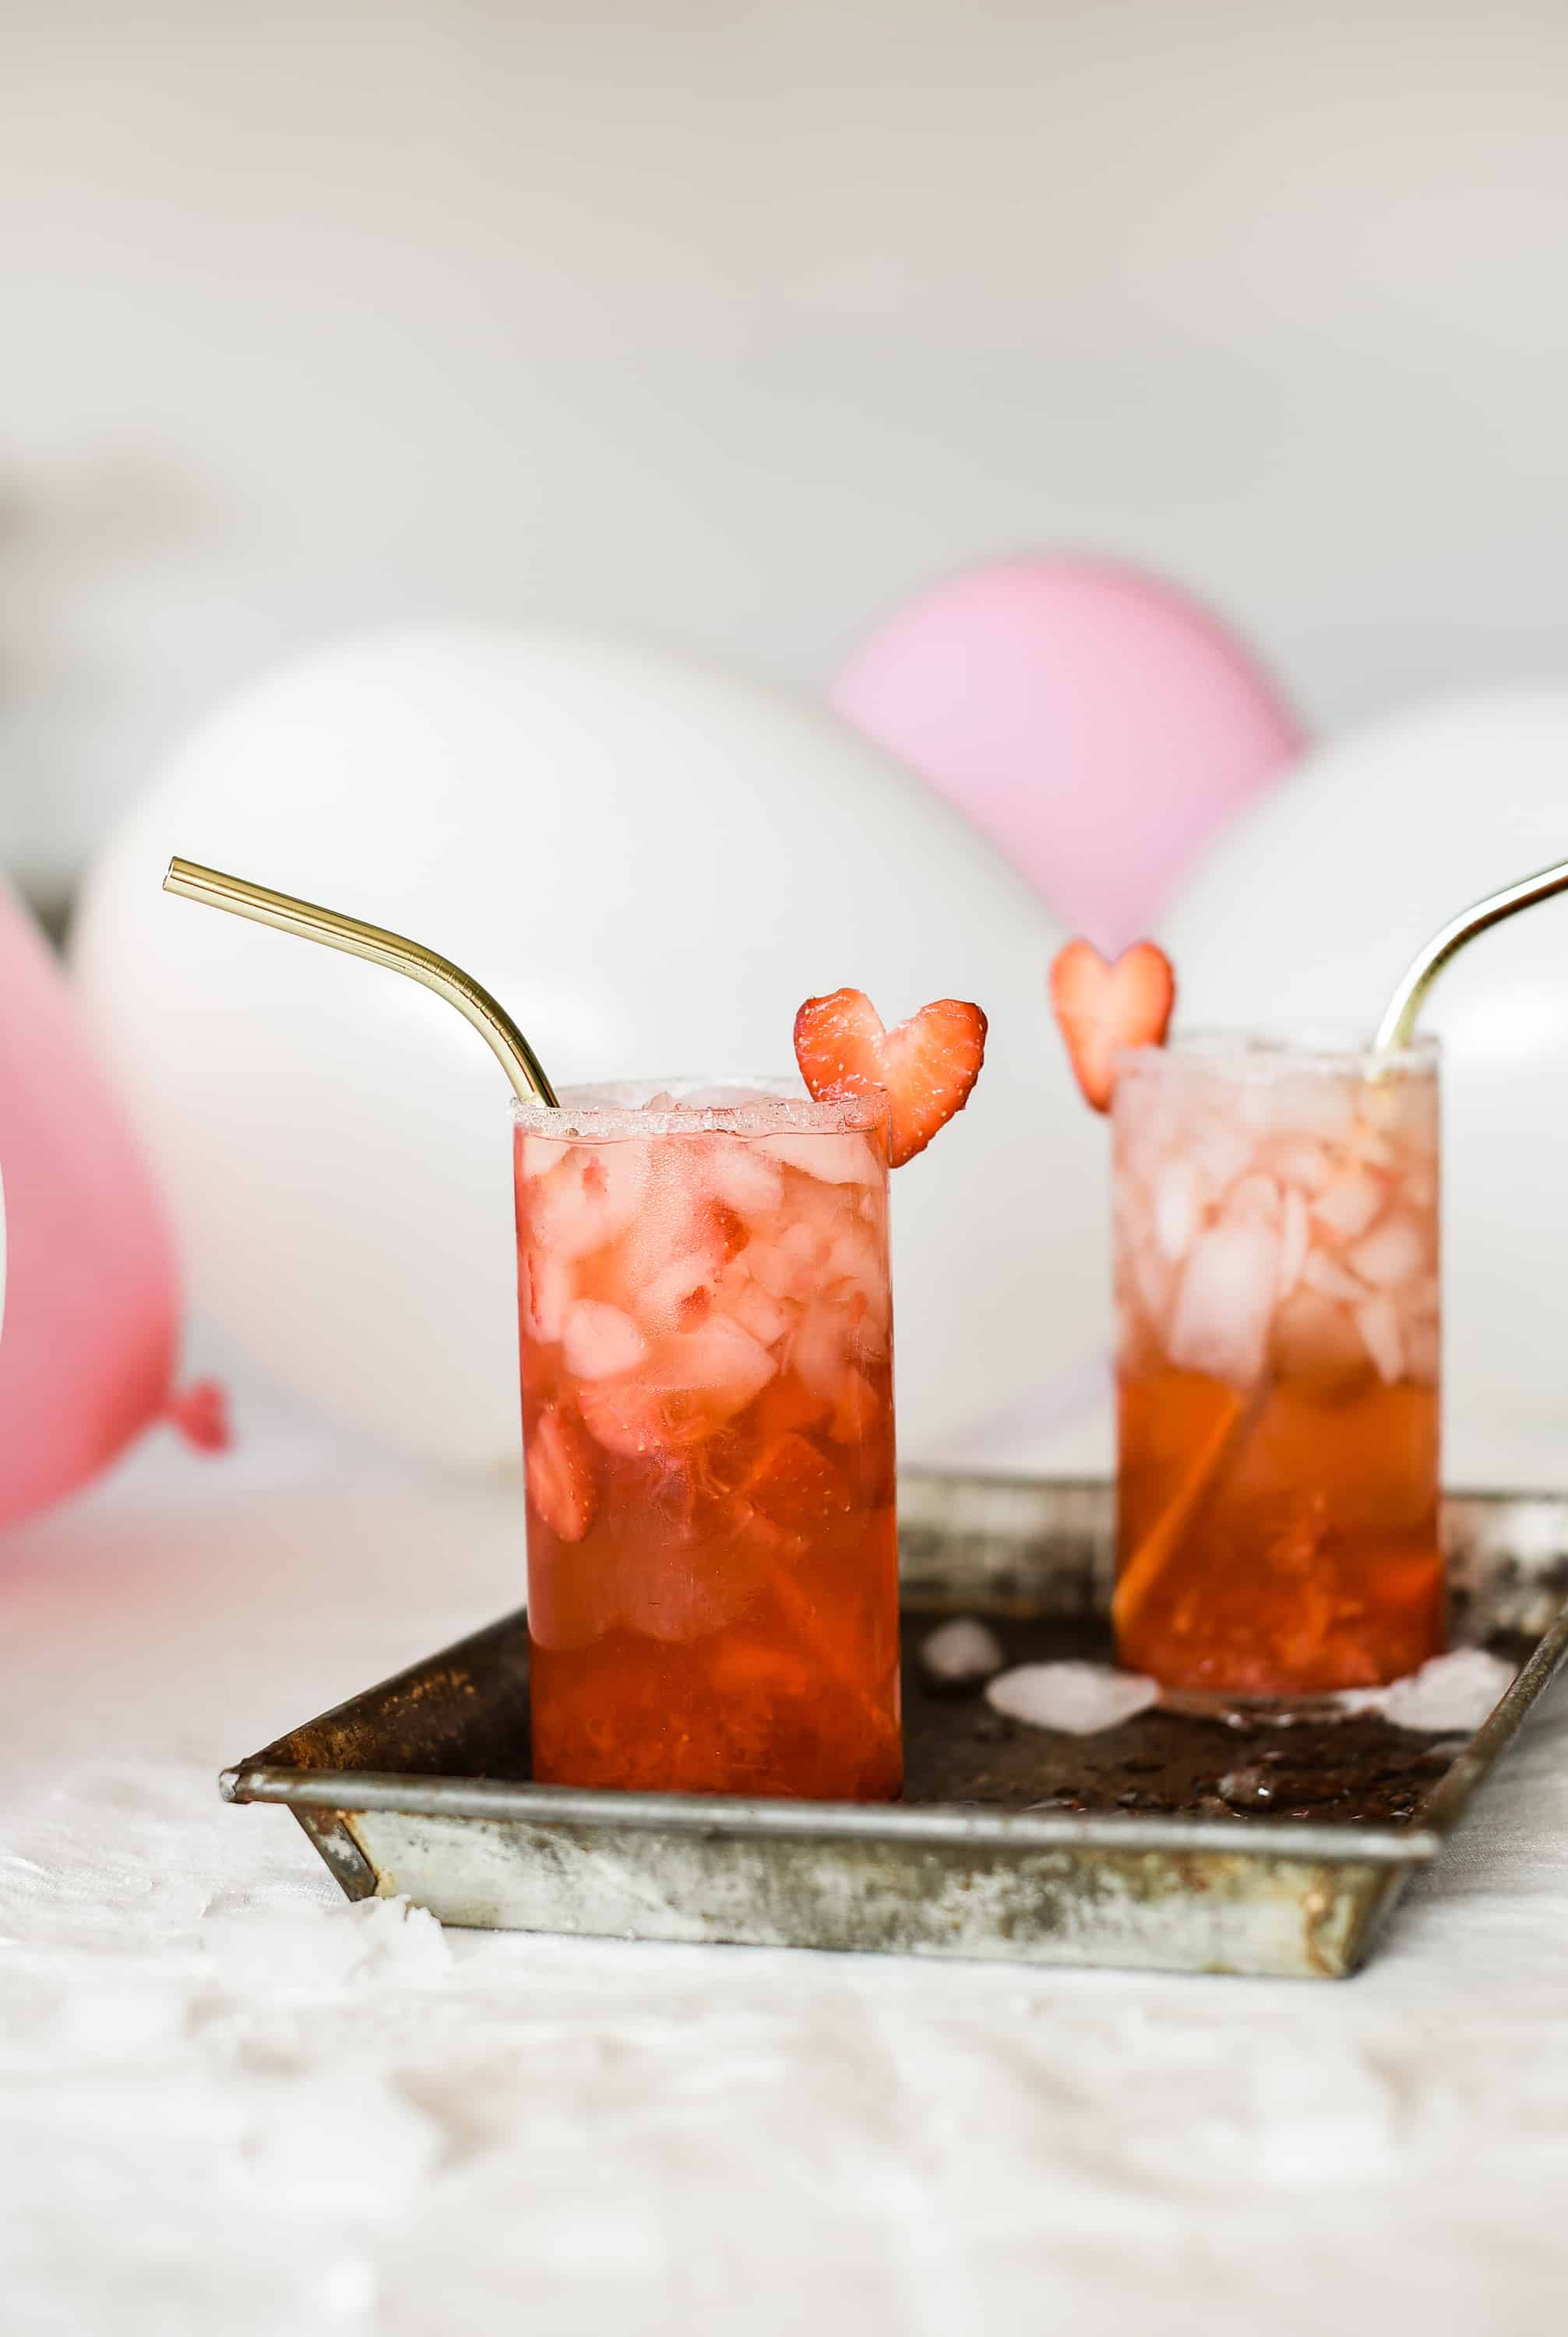 This strawberry champagne cocktail is the perfect thing to serve this Valentine’s Day! Made with crushed strawberries and rosé champagne, you will love this delicious cocktail for Valentine’s Day!